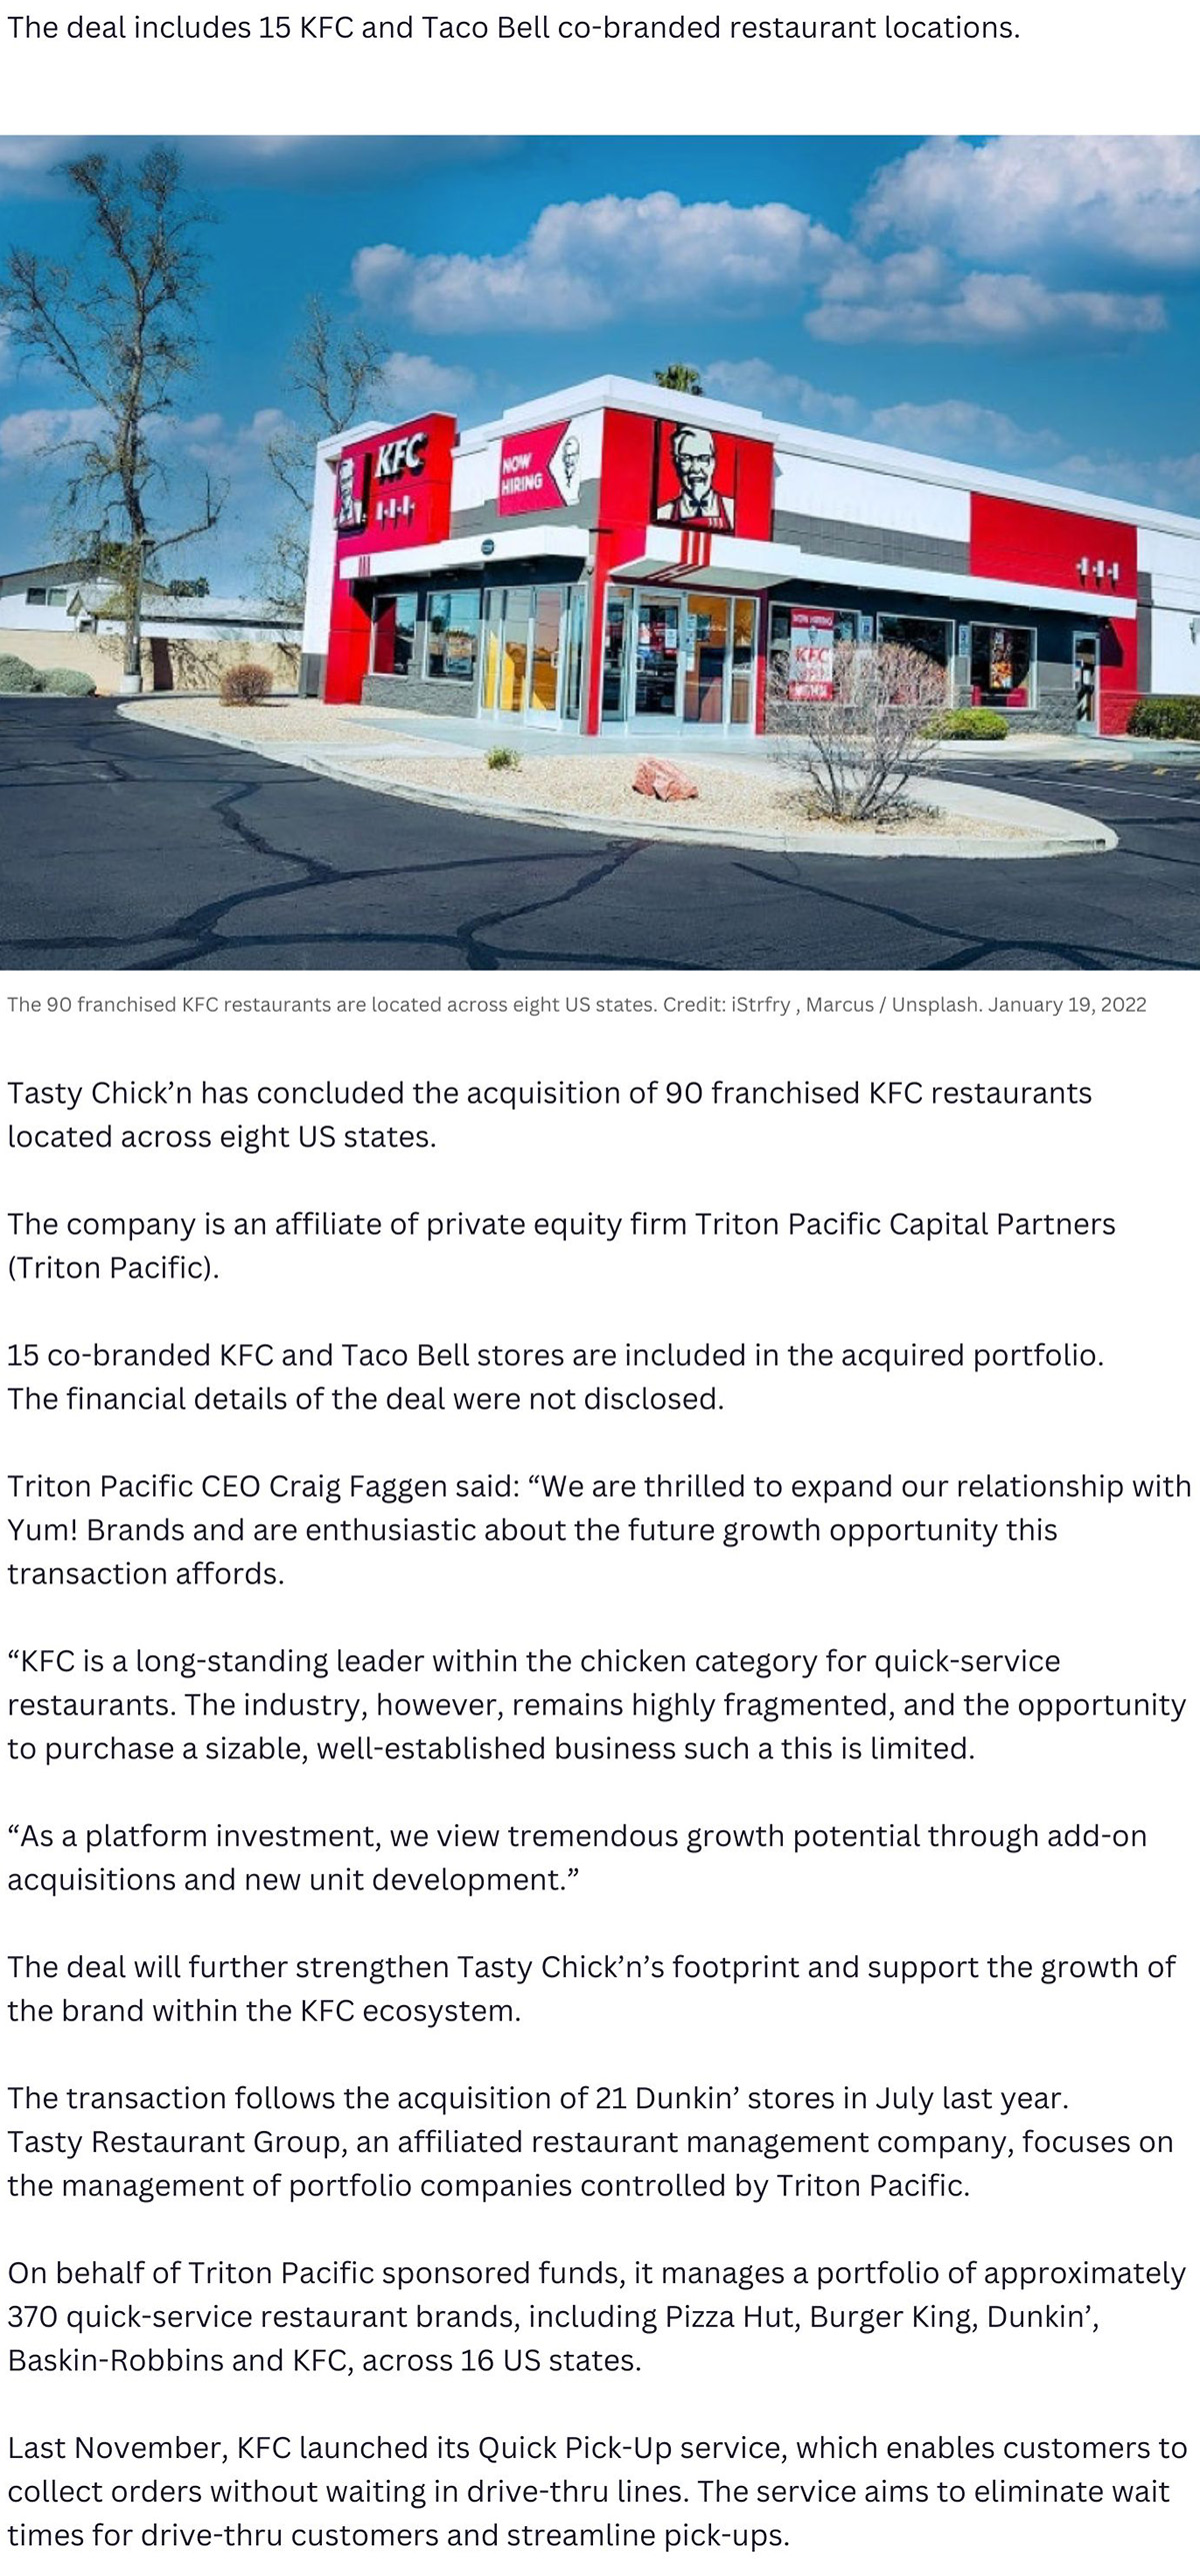 Tasty Chick'n acquires 90 franchised KFC Restaurants in US